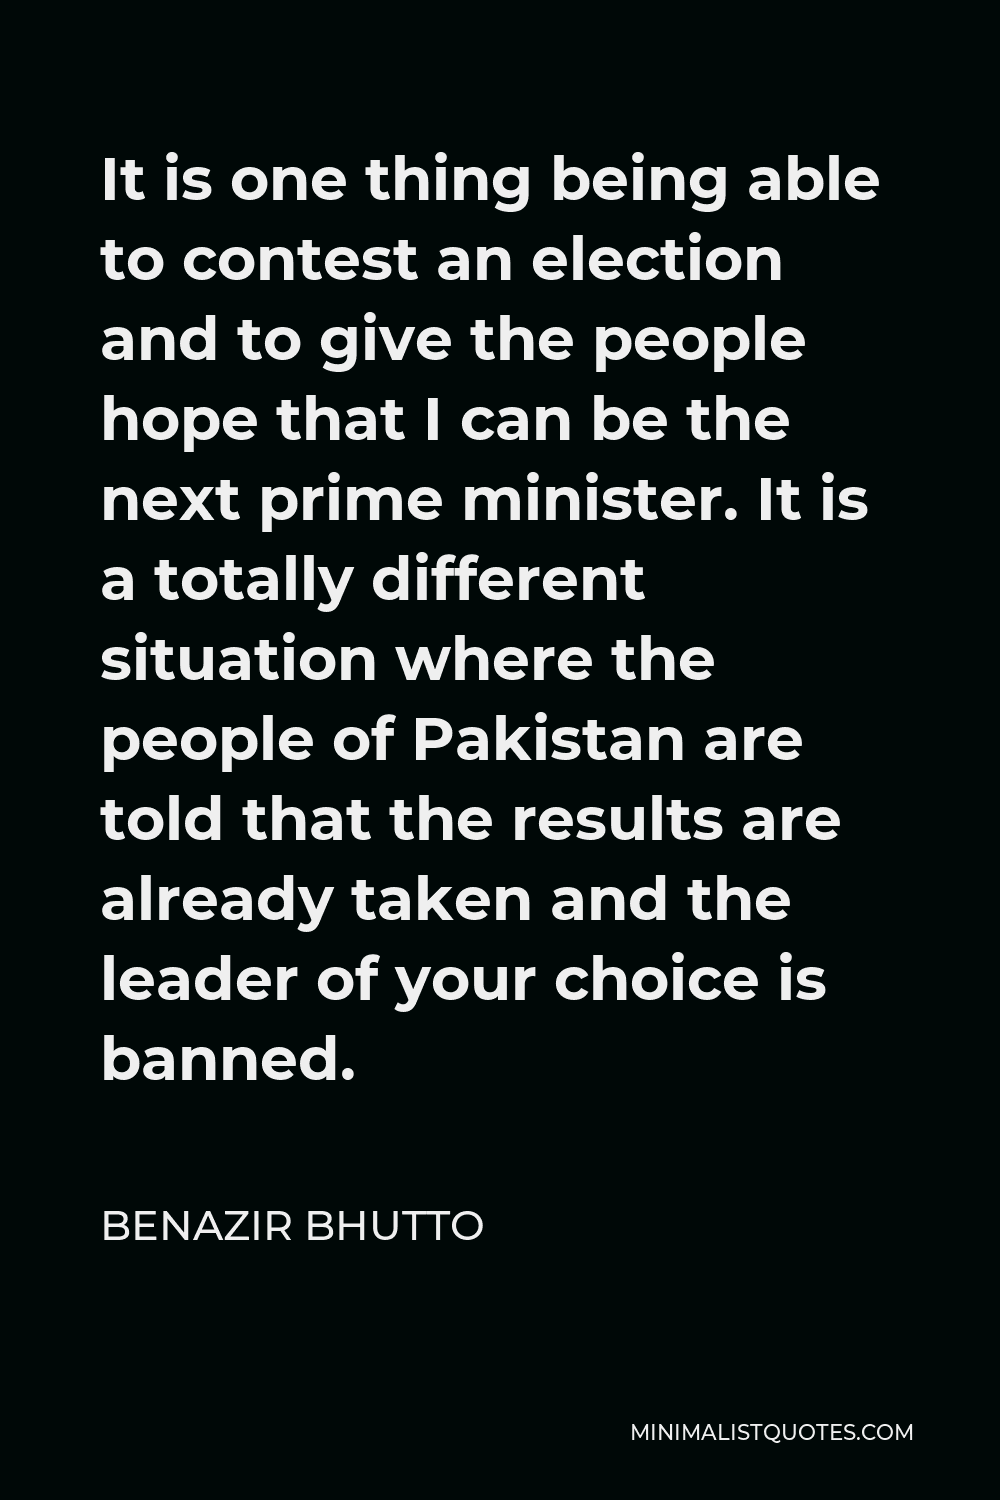 Benazir Bhutto Quote - It is one thing being able to contest an election and to give the people hope that I can be the next prime minister. It is a totally different situation where the people of Pakistan are told that the results are already taken and the leader of your choice is banned.